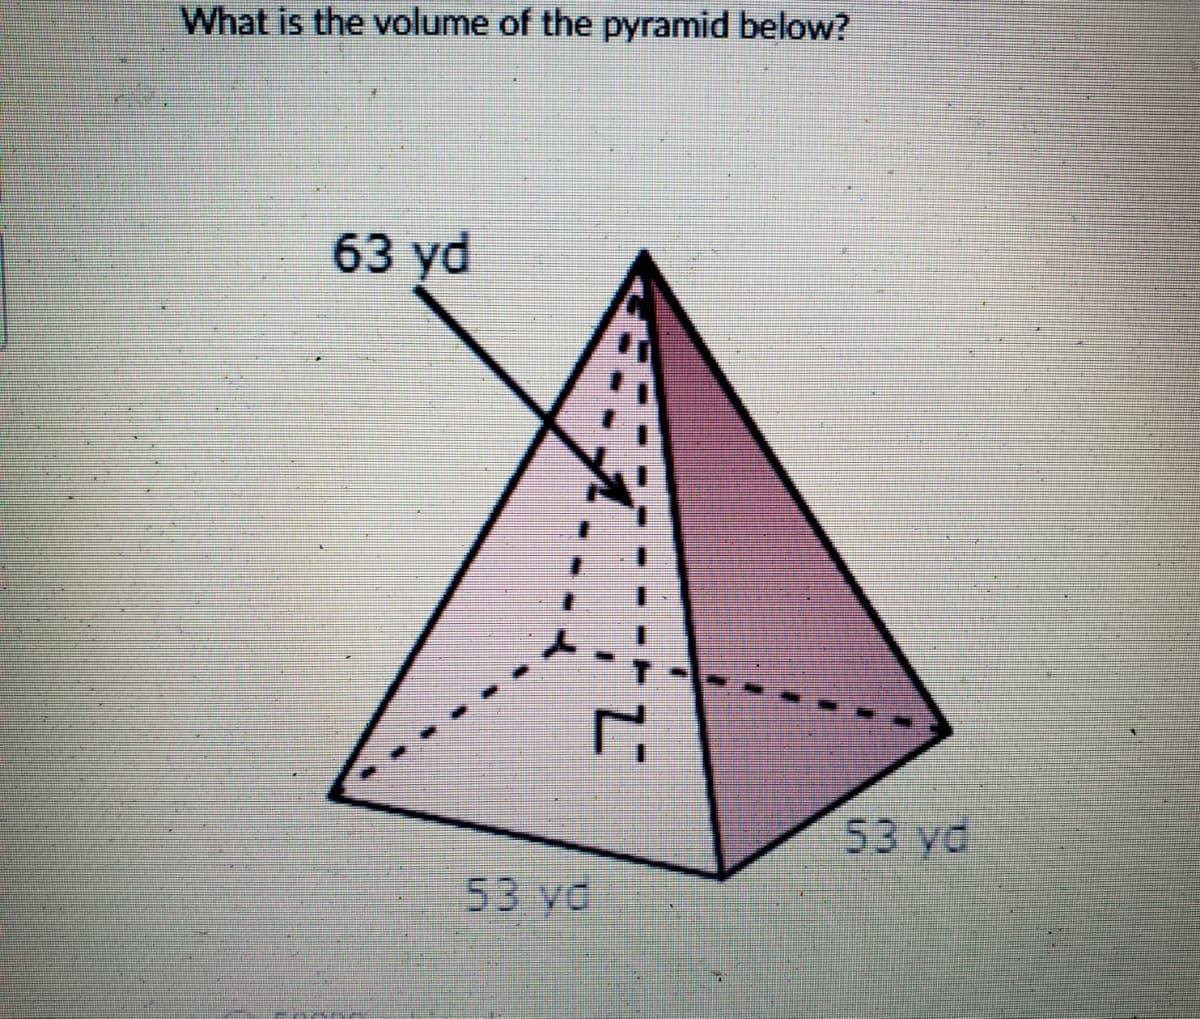 What is the volume of the pyramid below?
63 yd
7
53 vd
53 vd